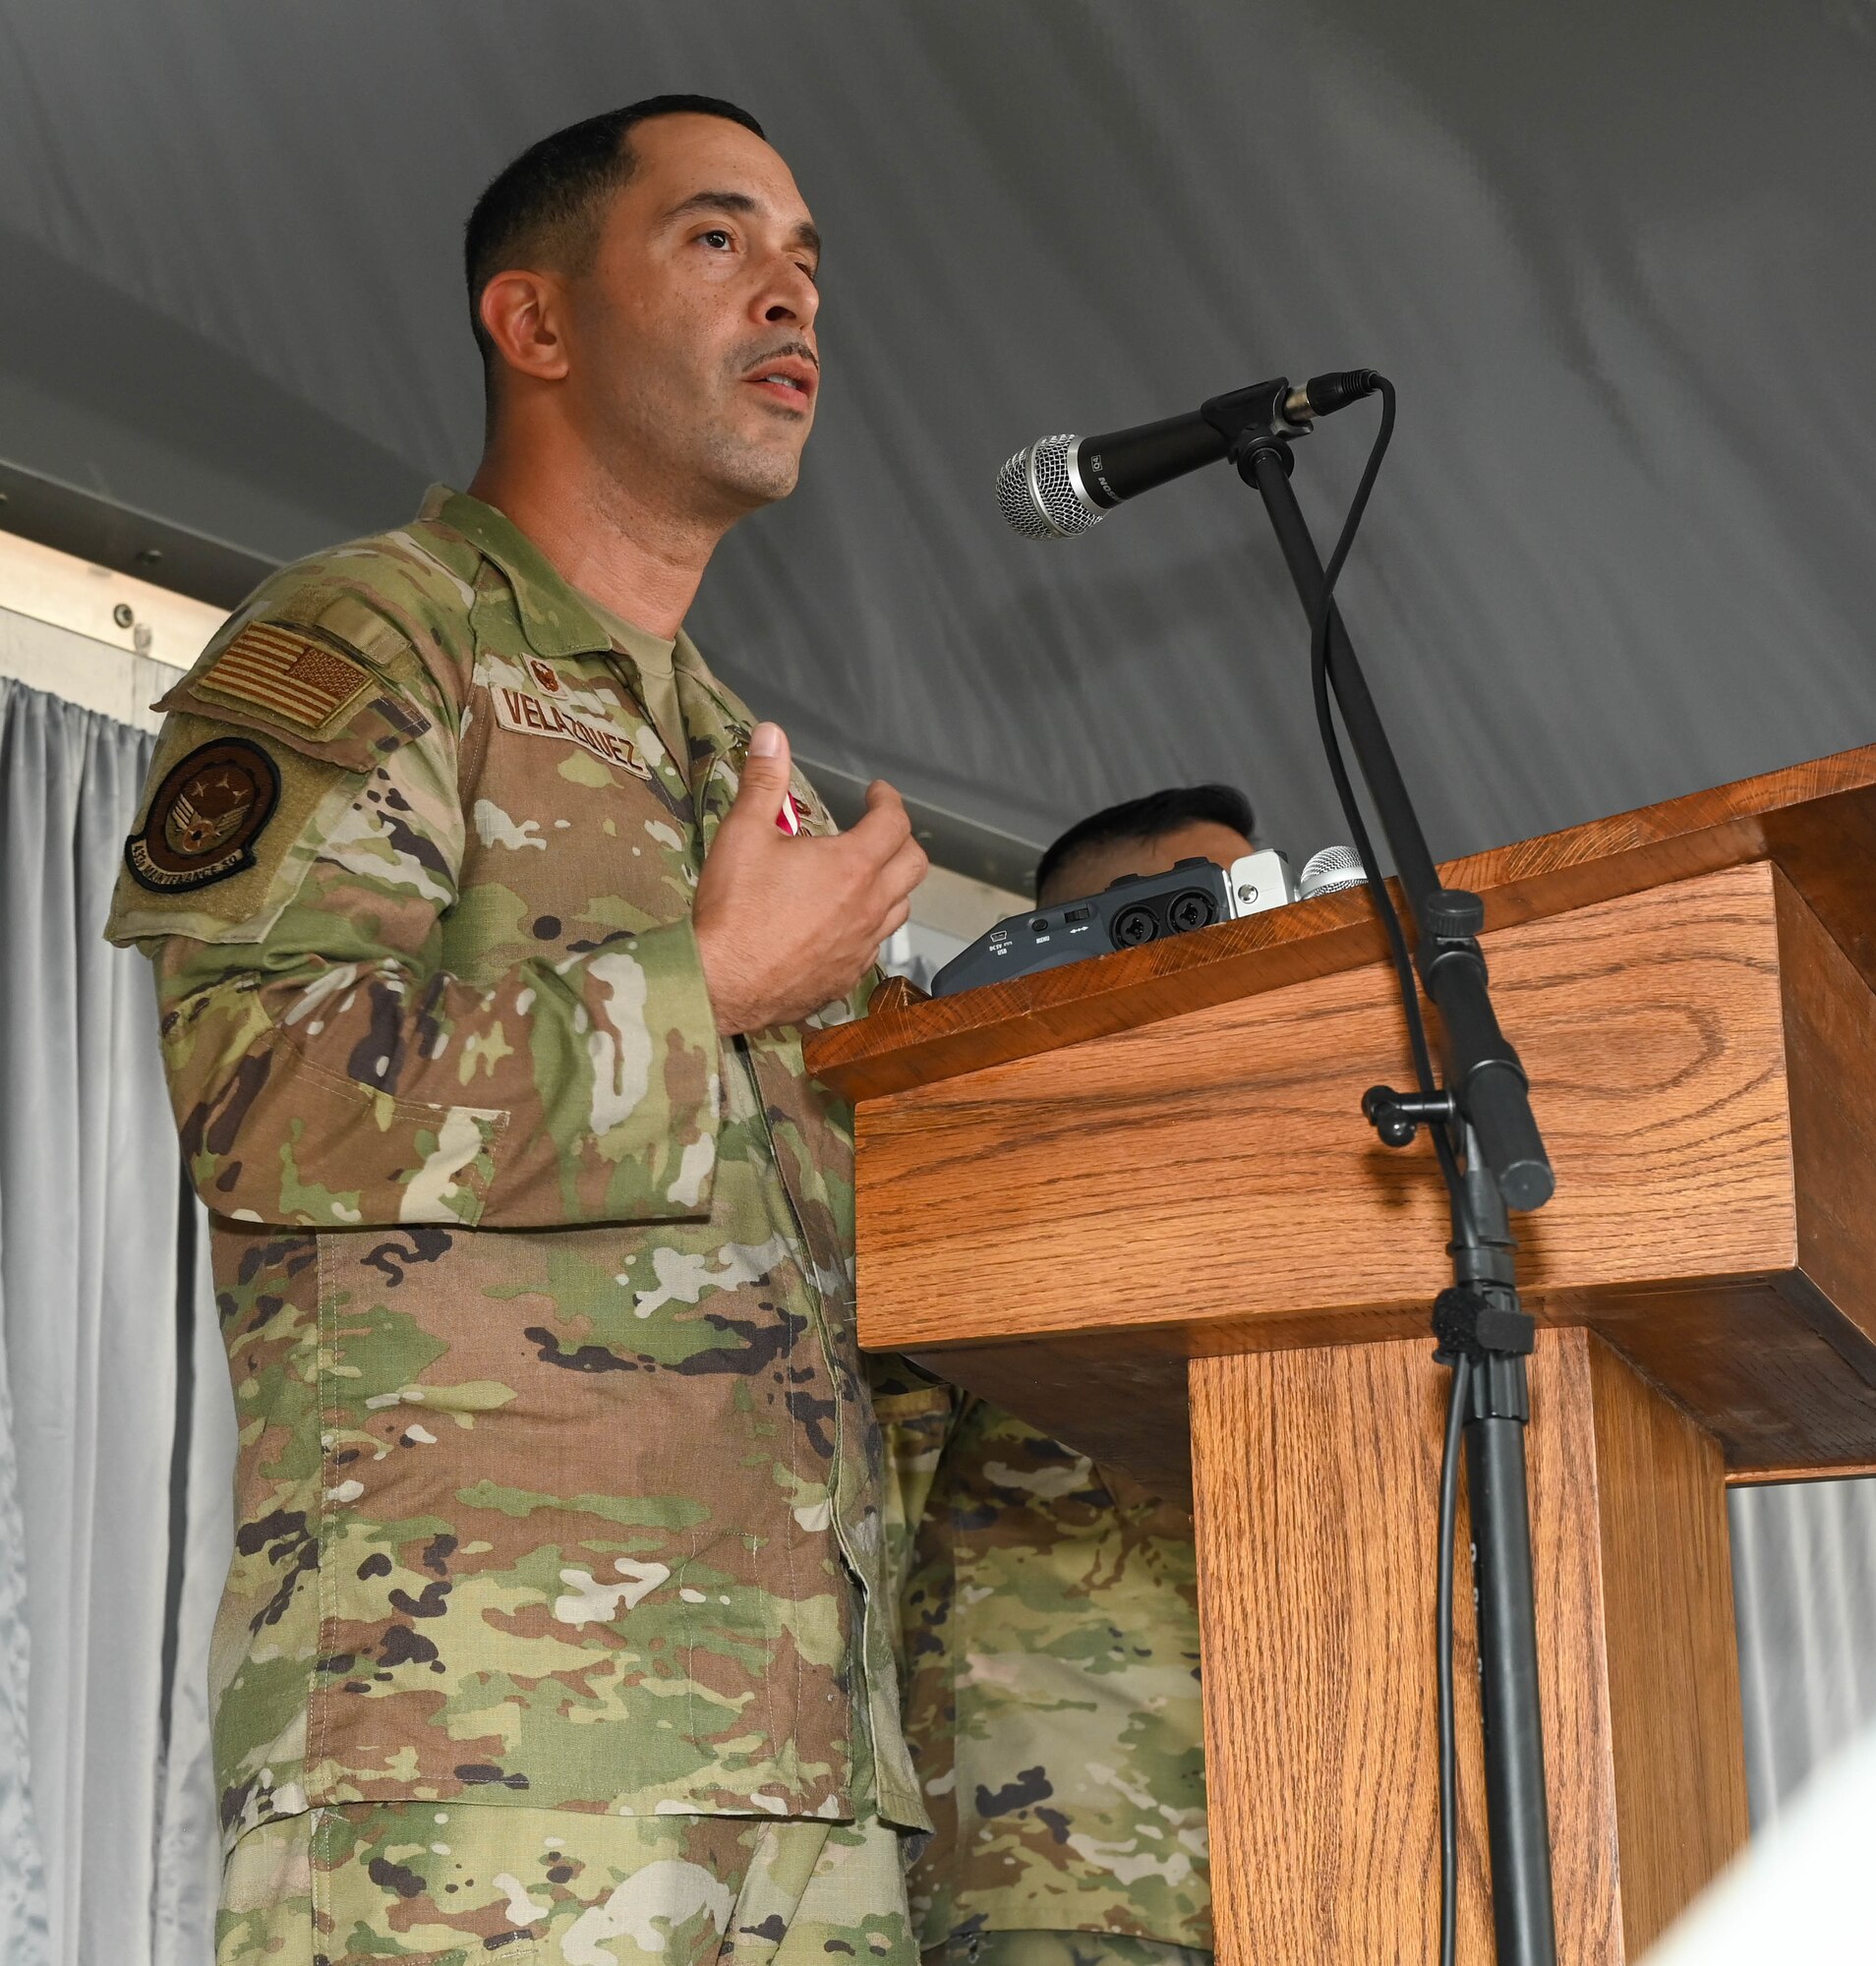 Maj. Nicholas Velazquez Jr. speaks to 433rd Aircraft Maintenance Squadron Airmen after assuming command Sept. 10, 2022, during a change of command ceremony at Joint Base San Antonio-Lackland, Texas. The mission of the 433rd AMXS is to provide on-equipment maintenance support to assigned C-5M Super Galaxy aircraft. (U.S. Air Force photo by Airman 1st Class Mark Colmenares)